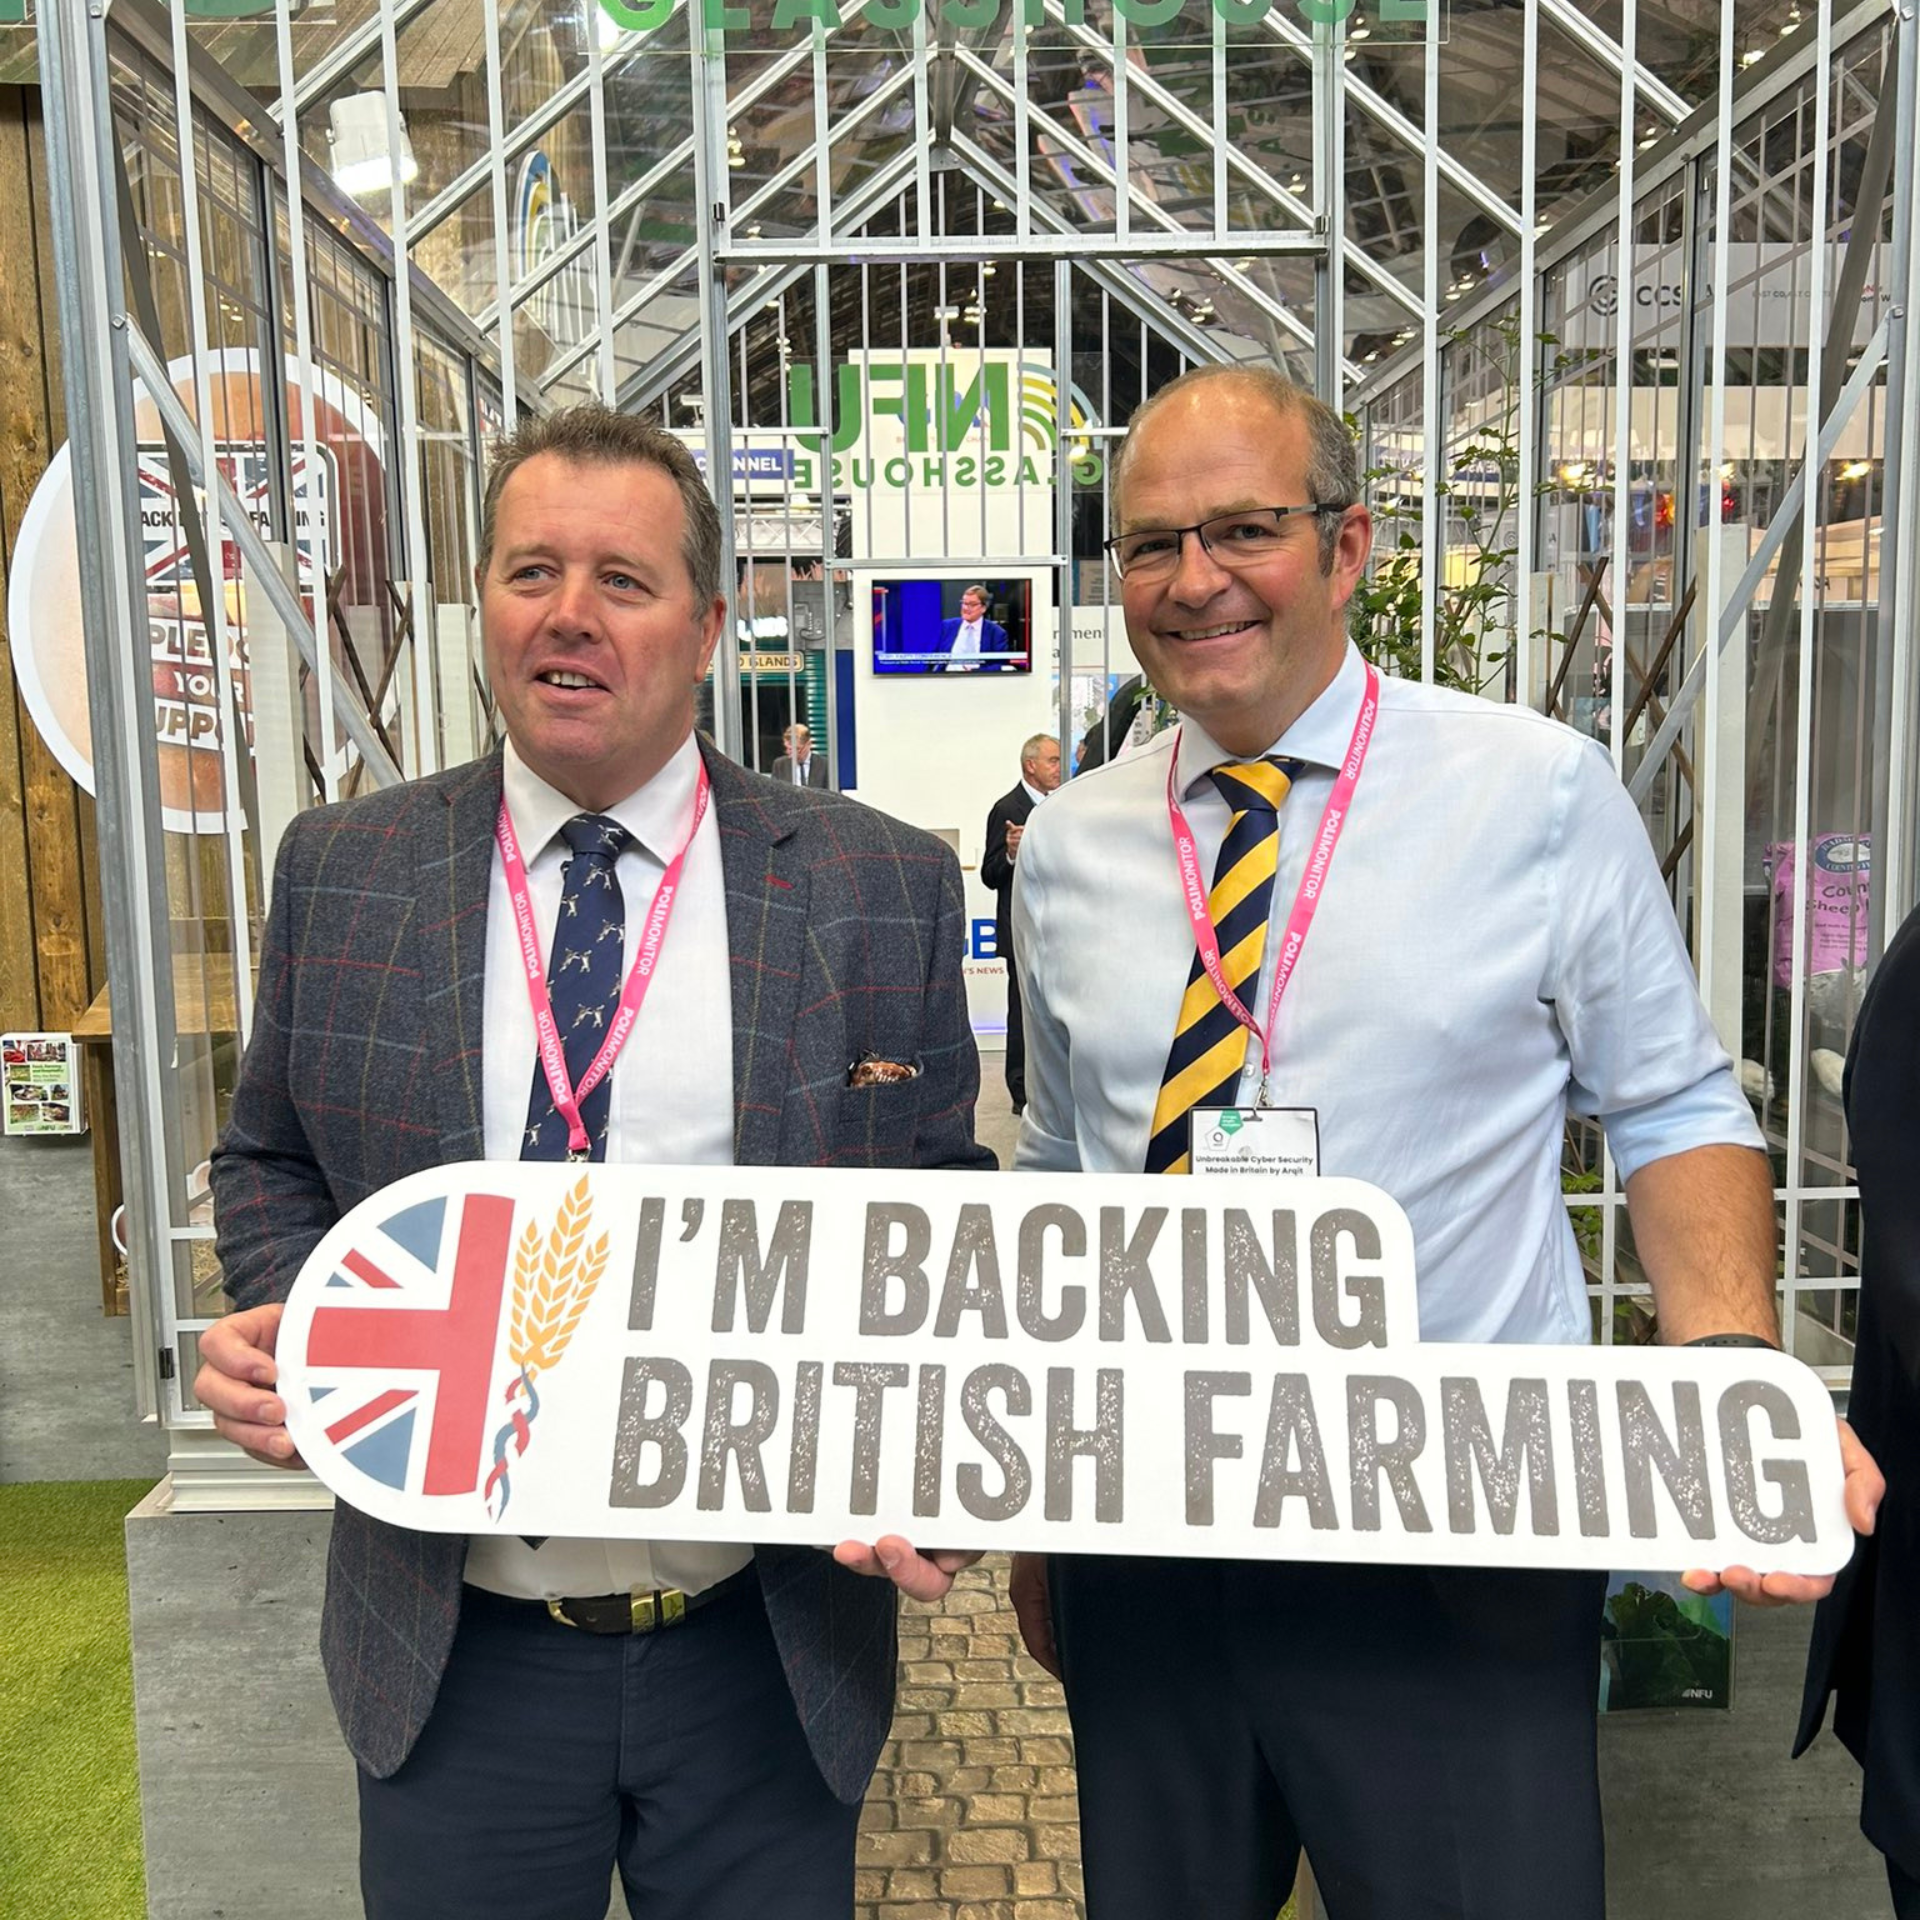 Minister of State for Food, Farming and Fisheries Mark Spencer MP